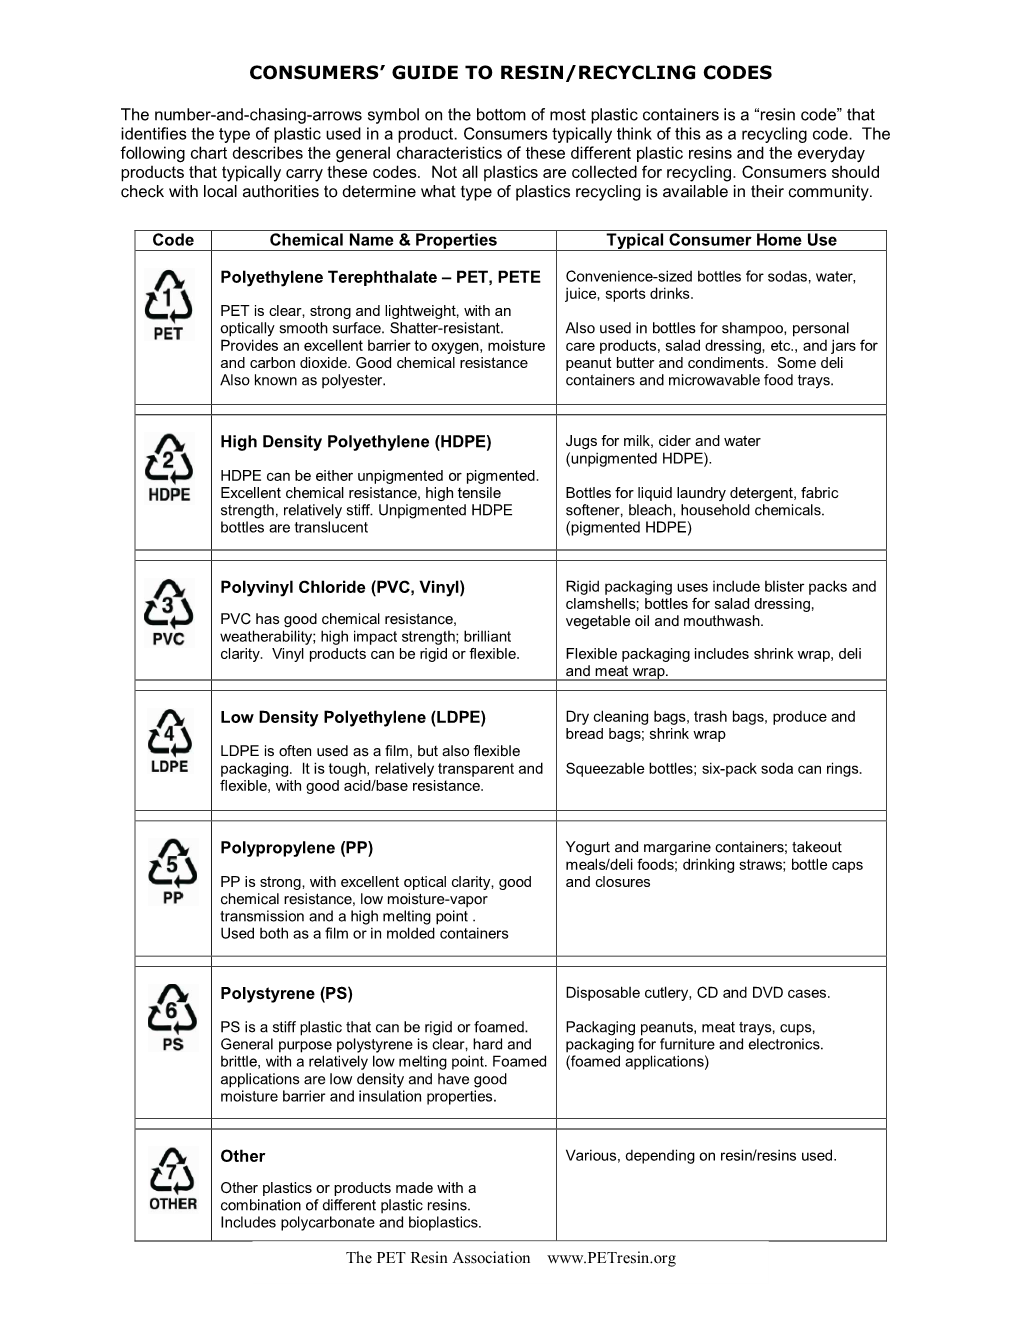 Consumers' Guide to Resin/Recycling Codes